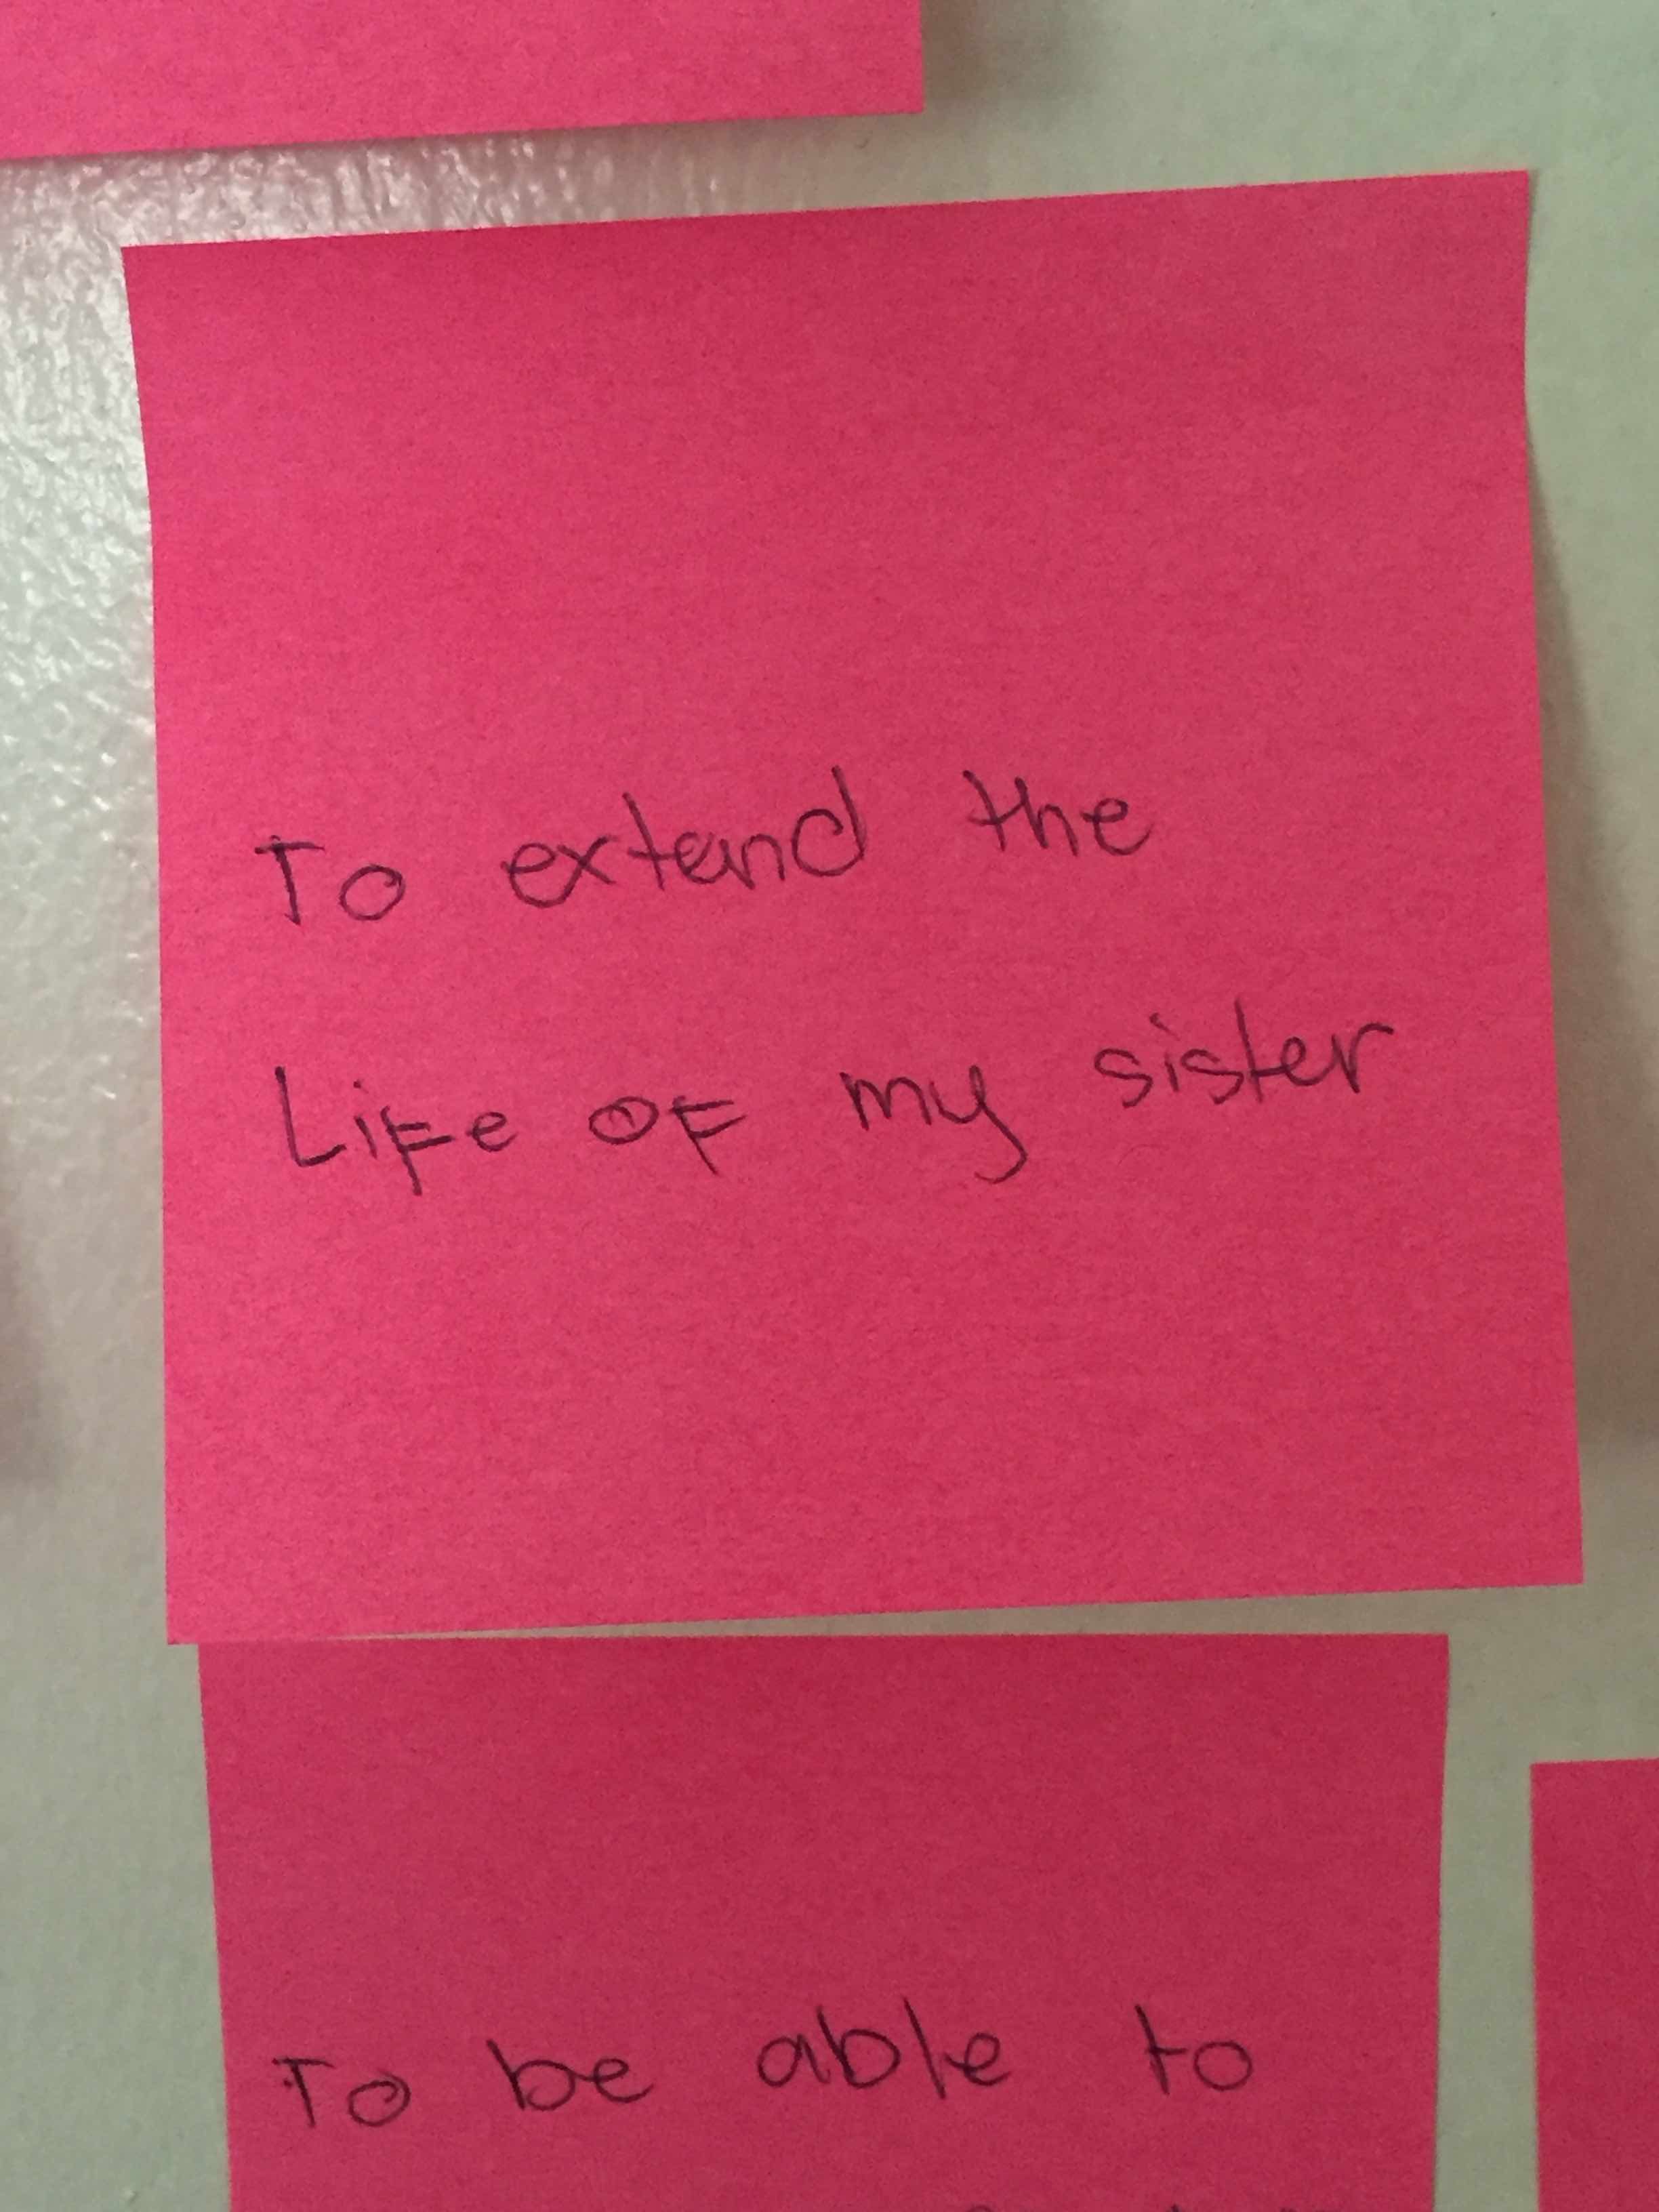 DREAMS. When asked about their dreams, one of FTC's students wrote that she wants to "extend the life" of her sister. Photo from the Fair Training Center. 